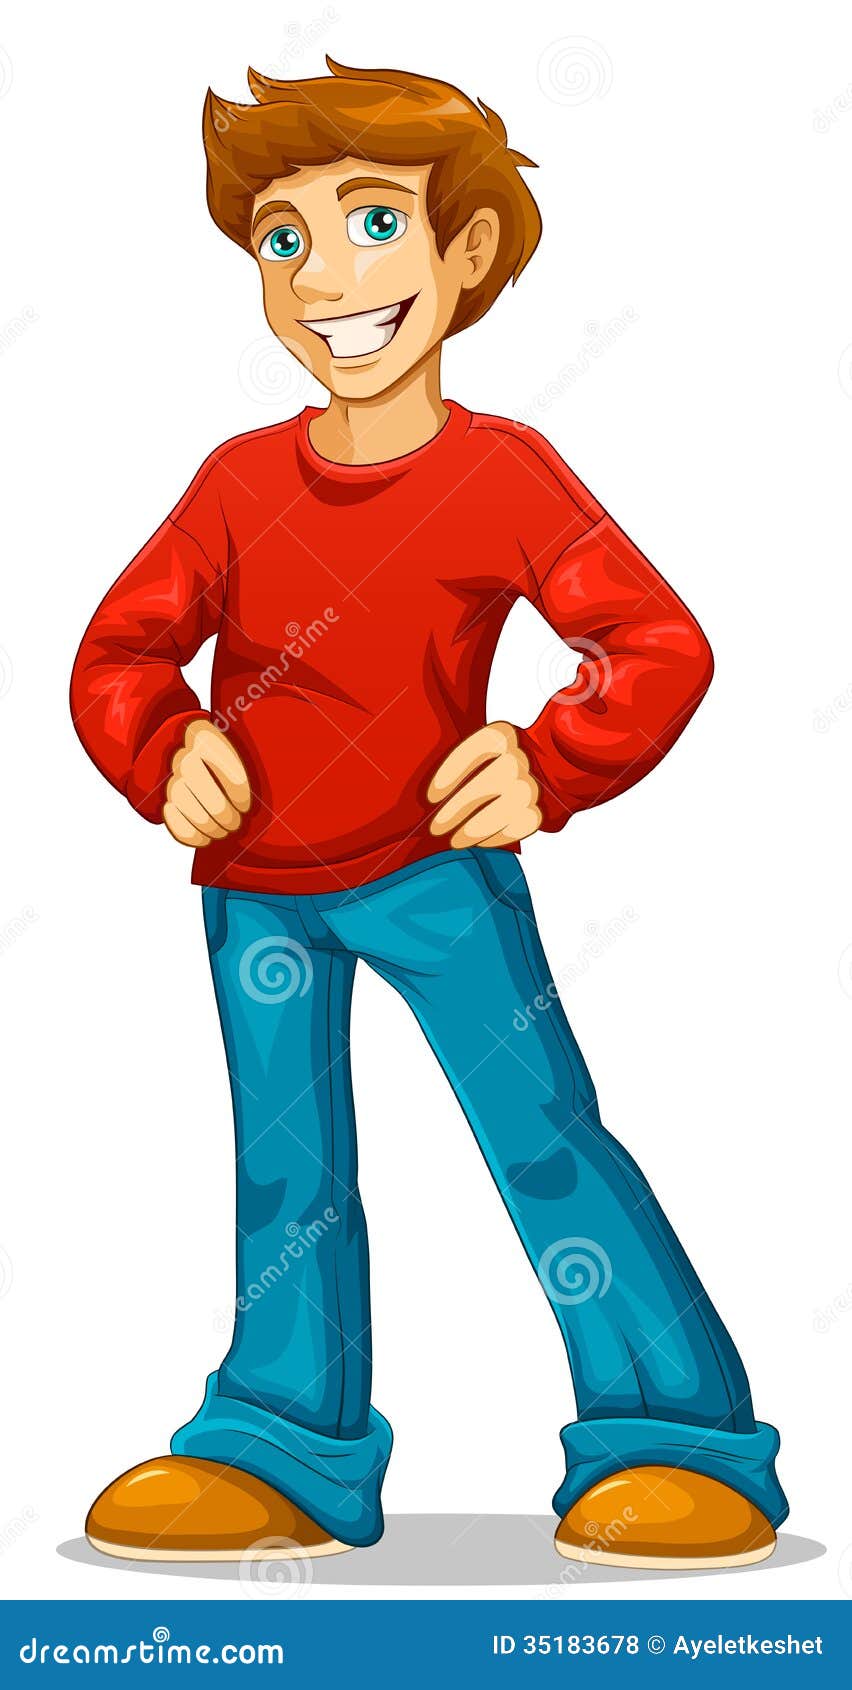 clipart young man - photo #15